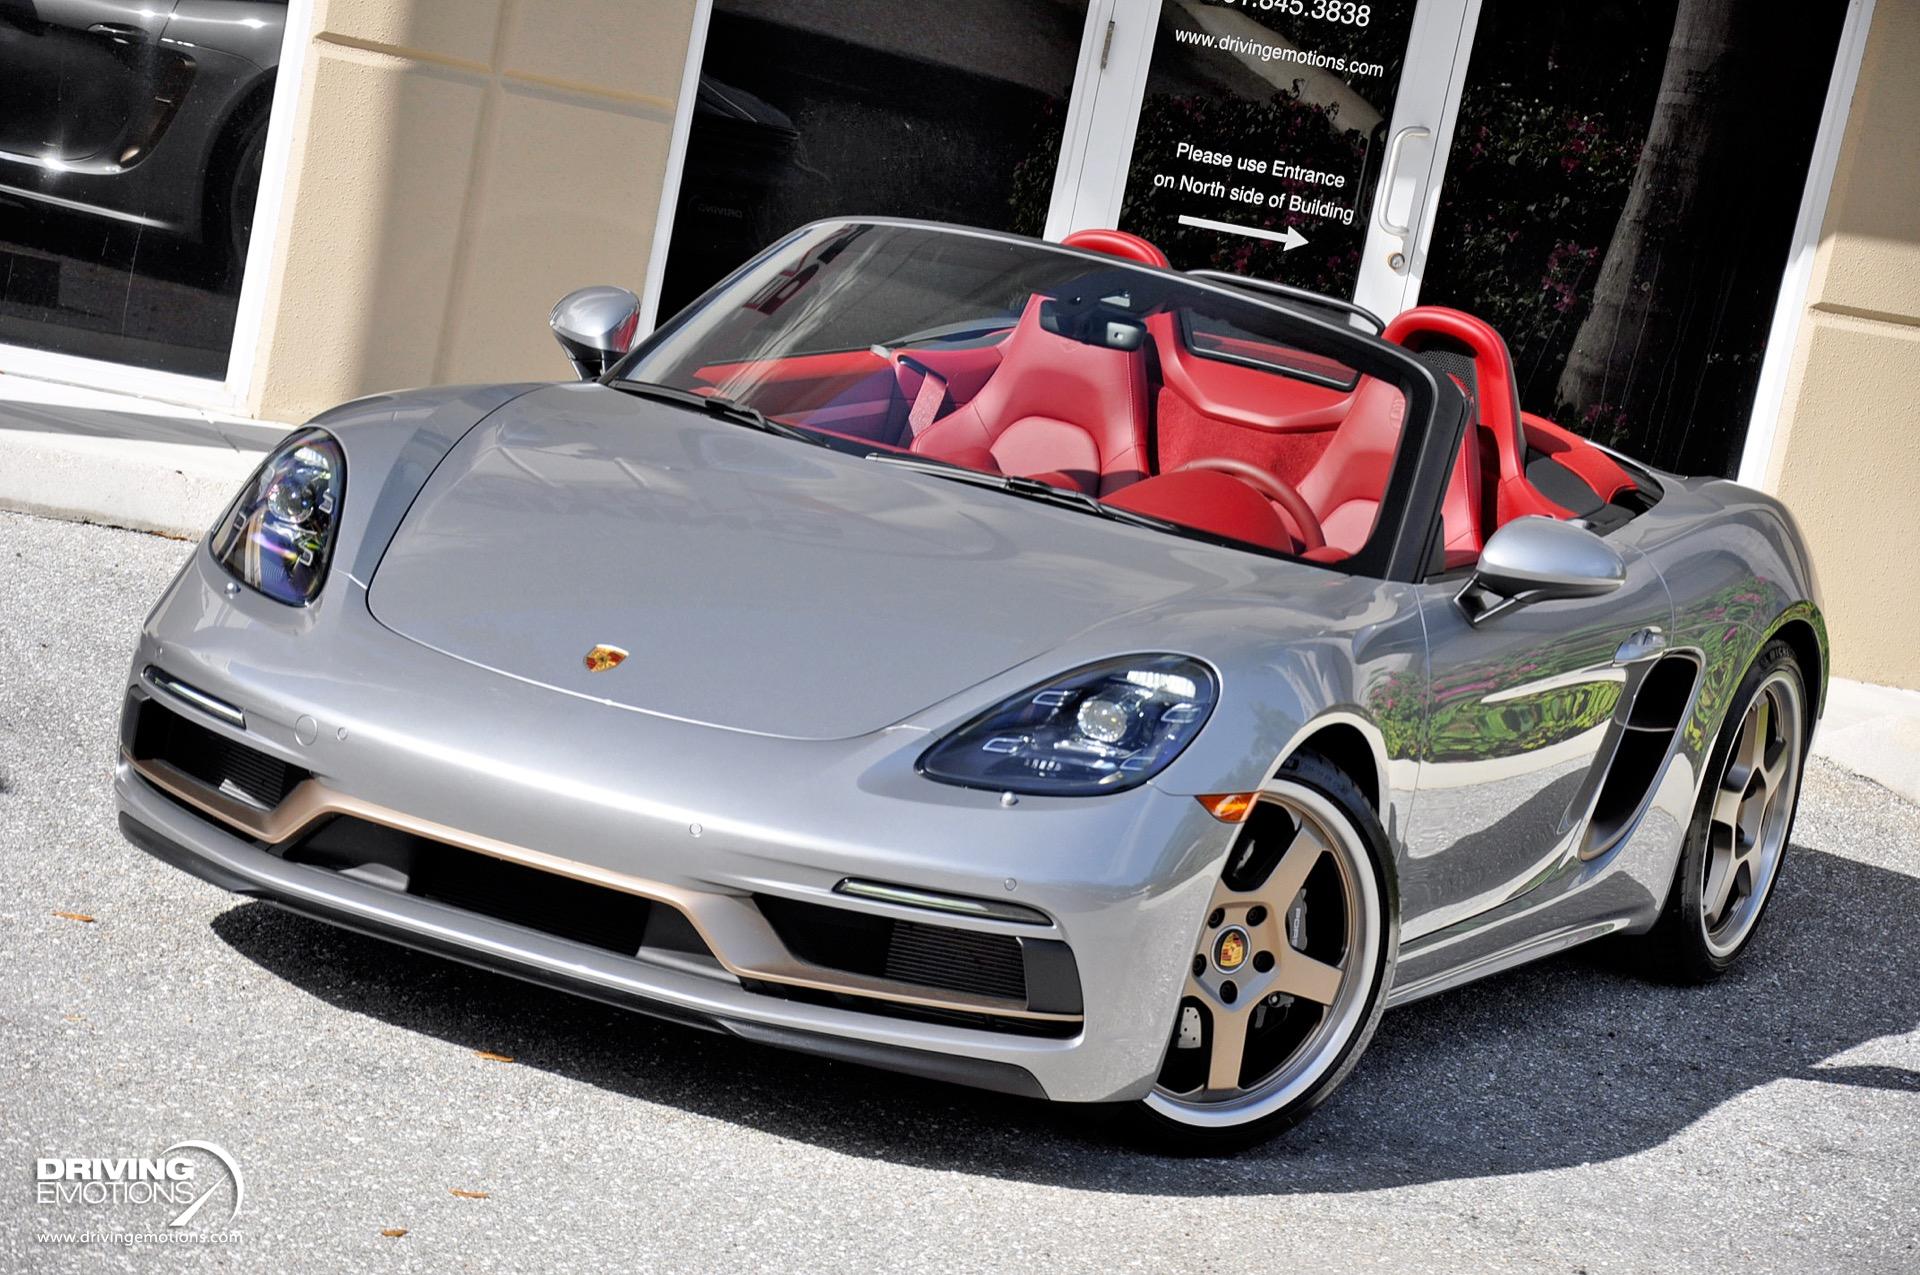 Used 2022 Porsche Boxster 25 Years! Number 416 of 1250 Built! 6-Speed Manual! RARE!! | Lake Park, FL